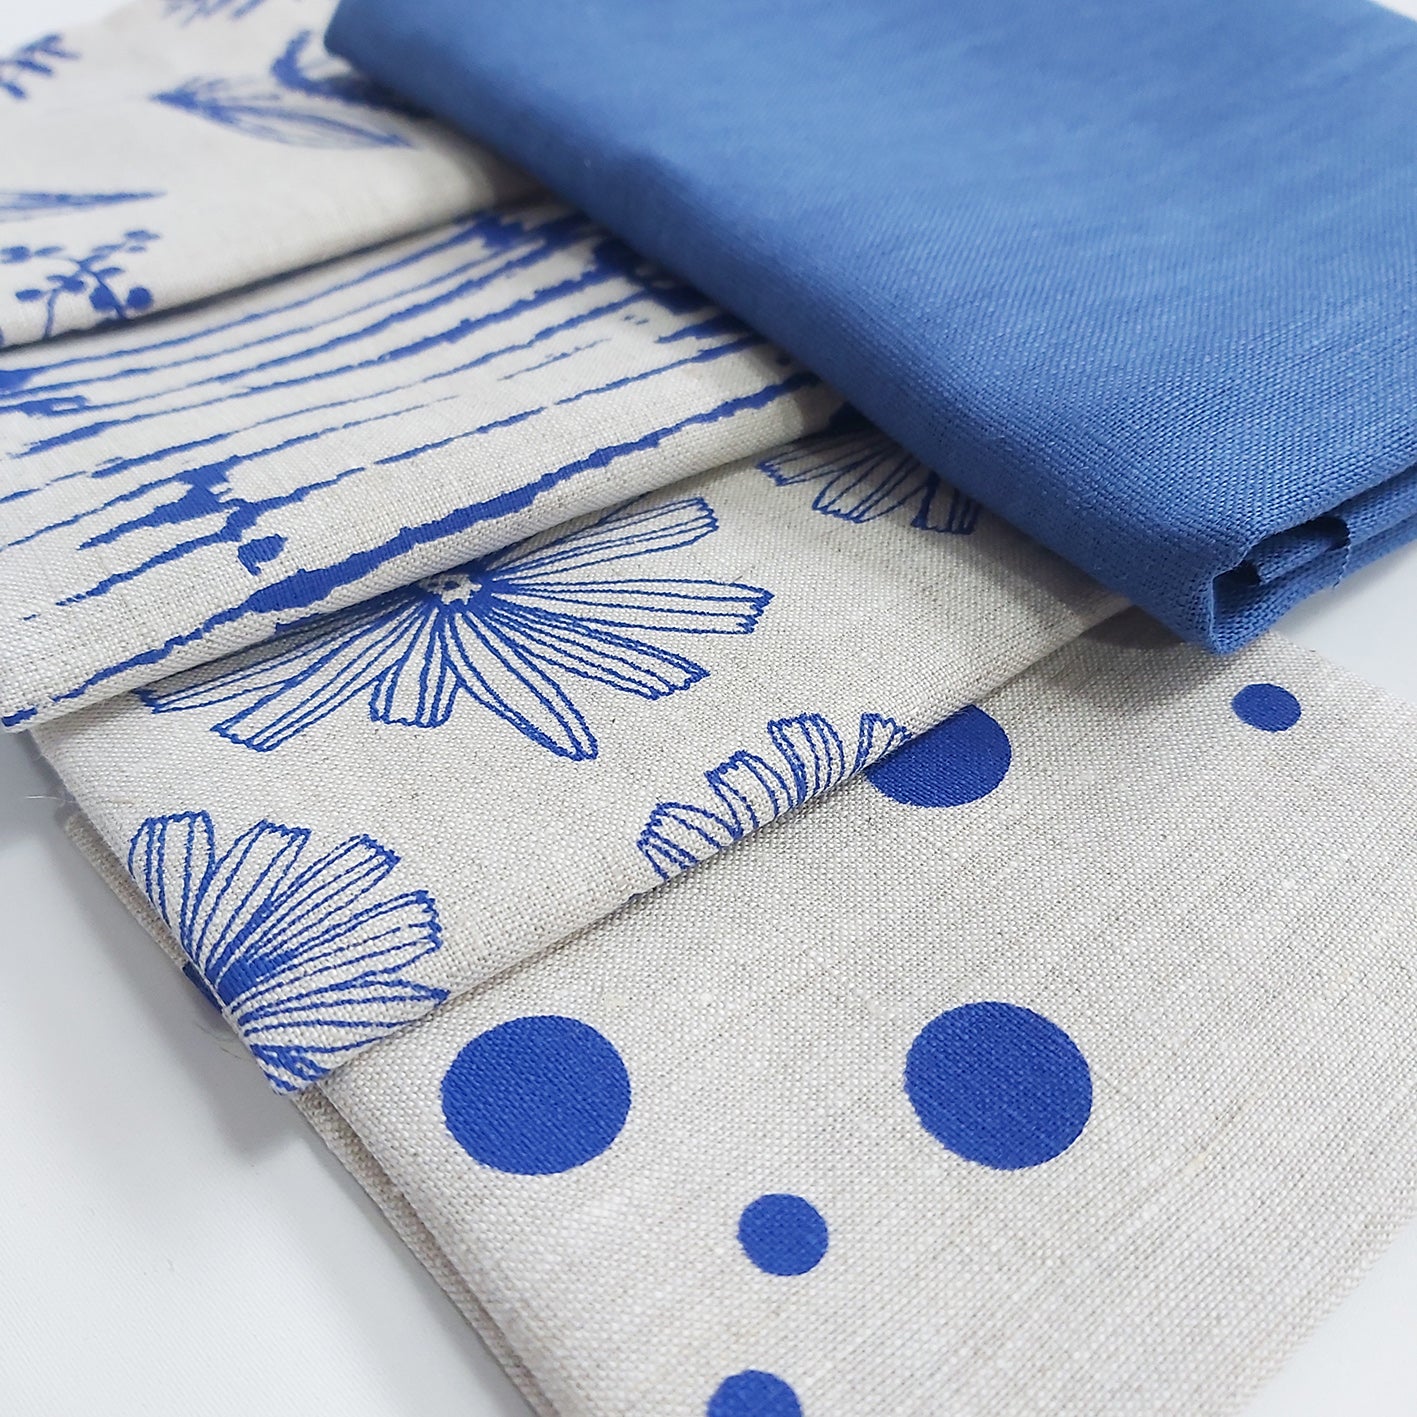 Fabric panels required to make Tall Poppy wall hanging designed by Stitch and Yarn and screenprinted fabric by Femke Textiles. All linen fabrics.